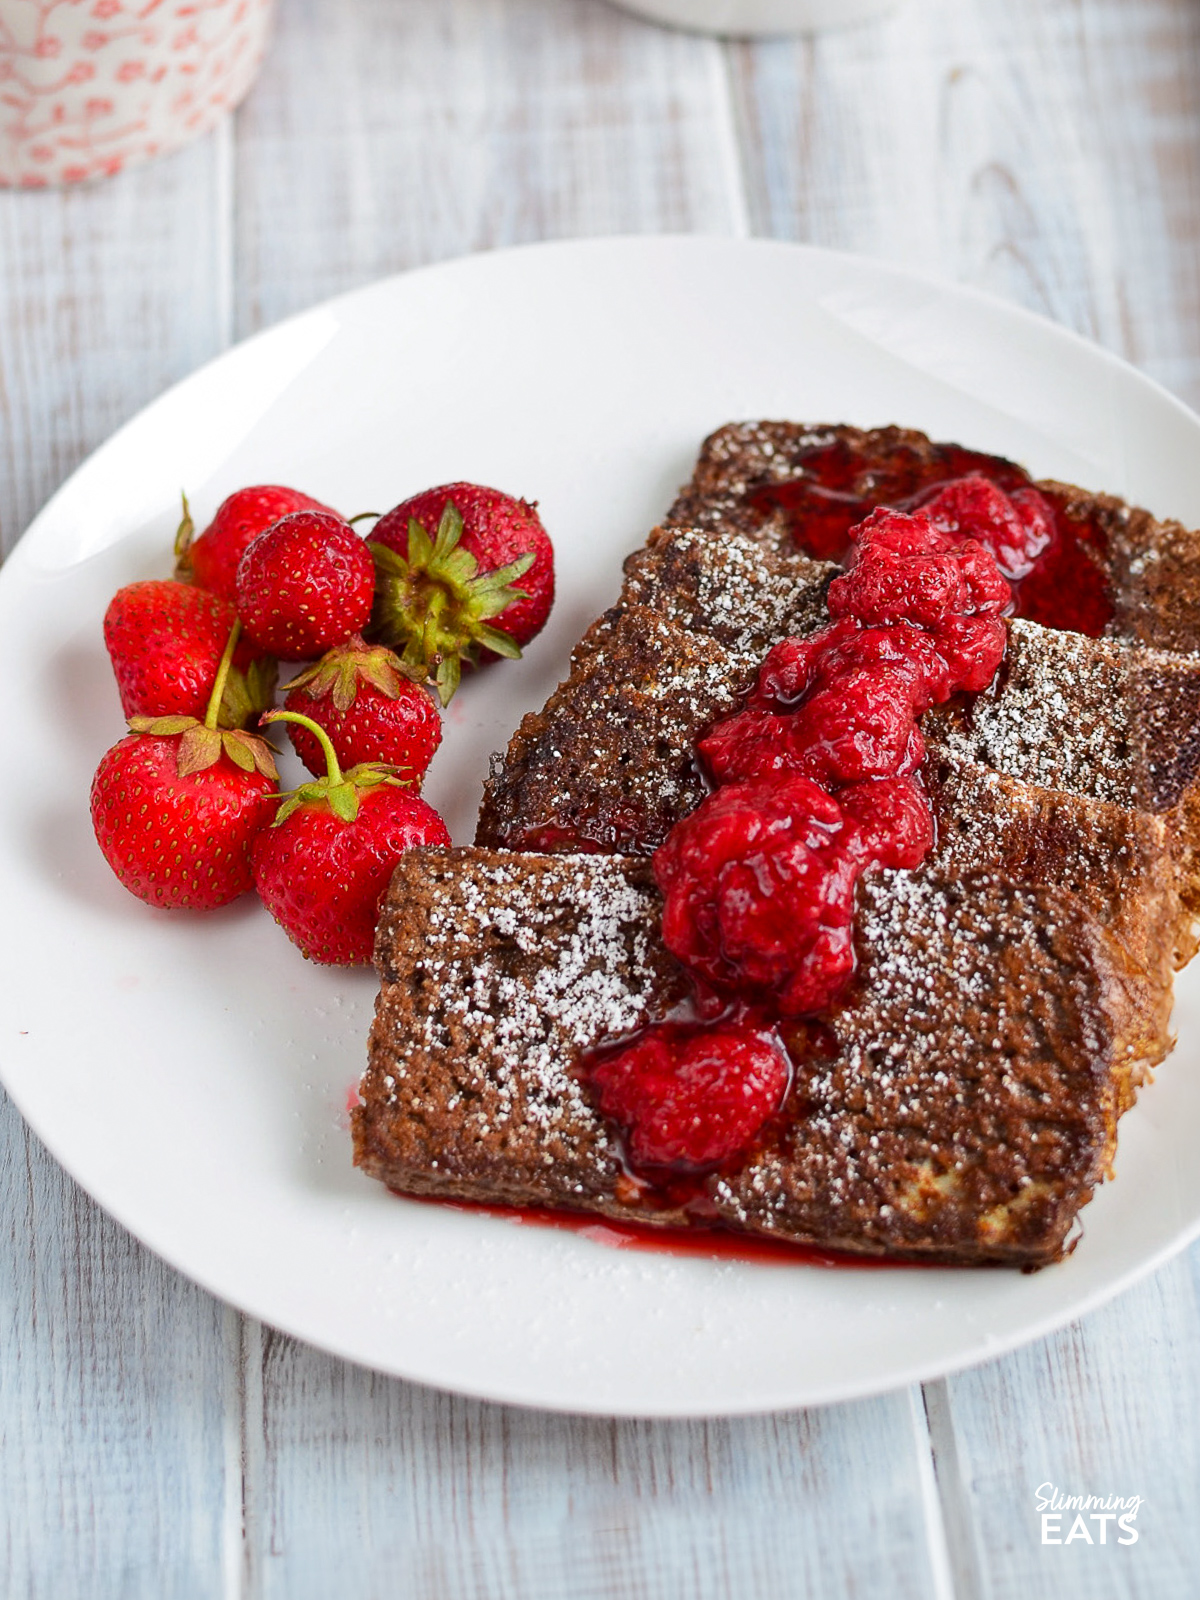 Chocolate French toast with strawberry syrup and fresh strawberries served on a white plate.